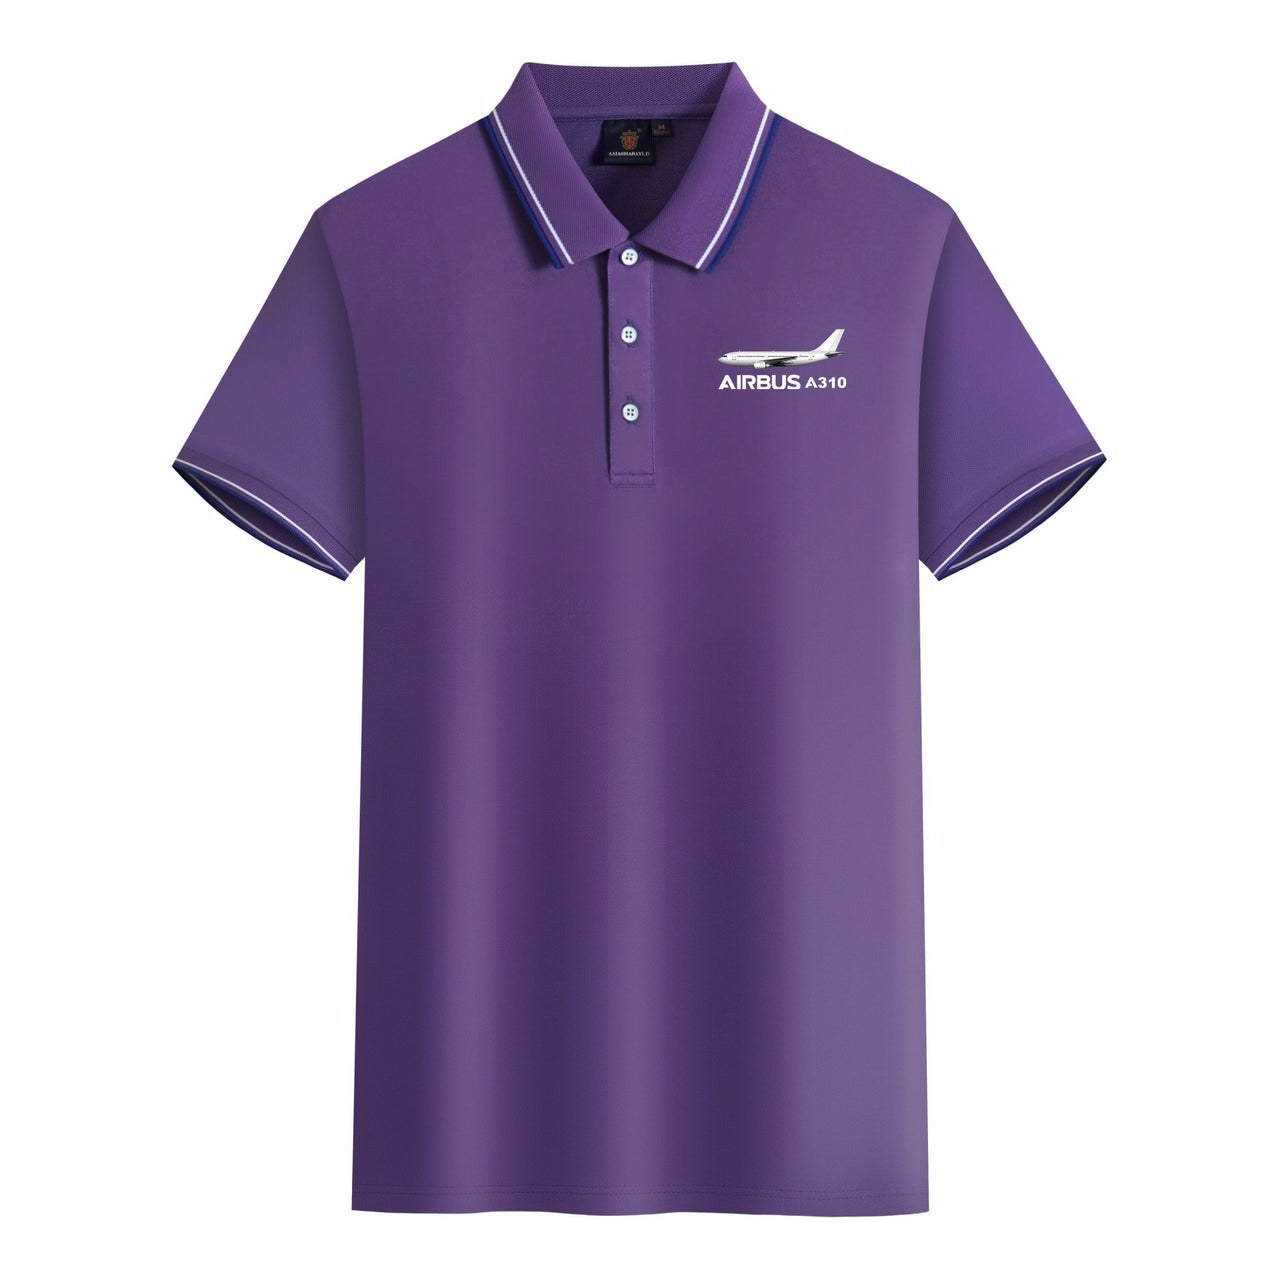 The Airbus A310 Designed Stylish Polo T-Shirts